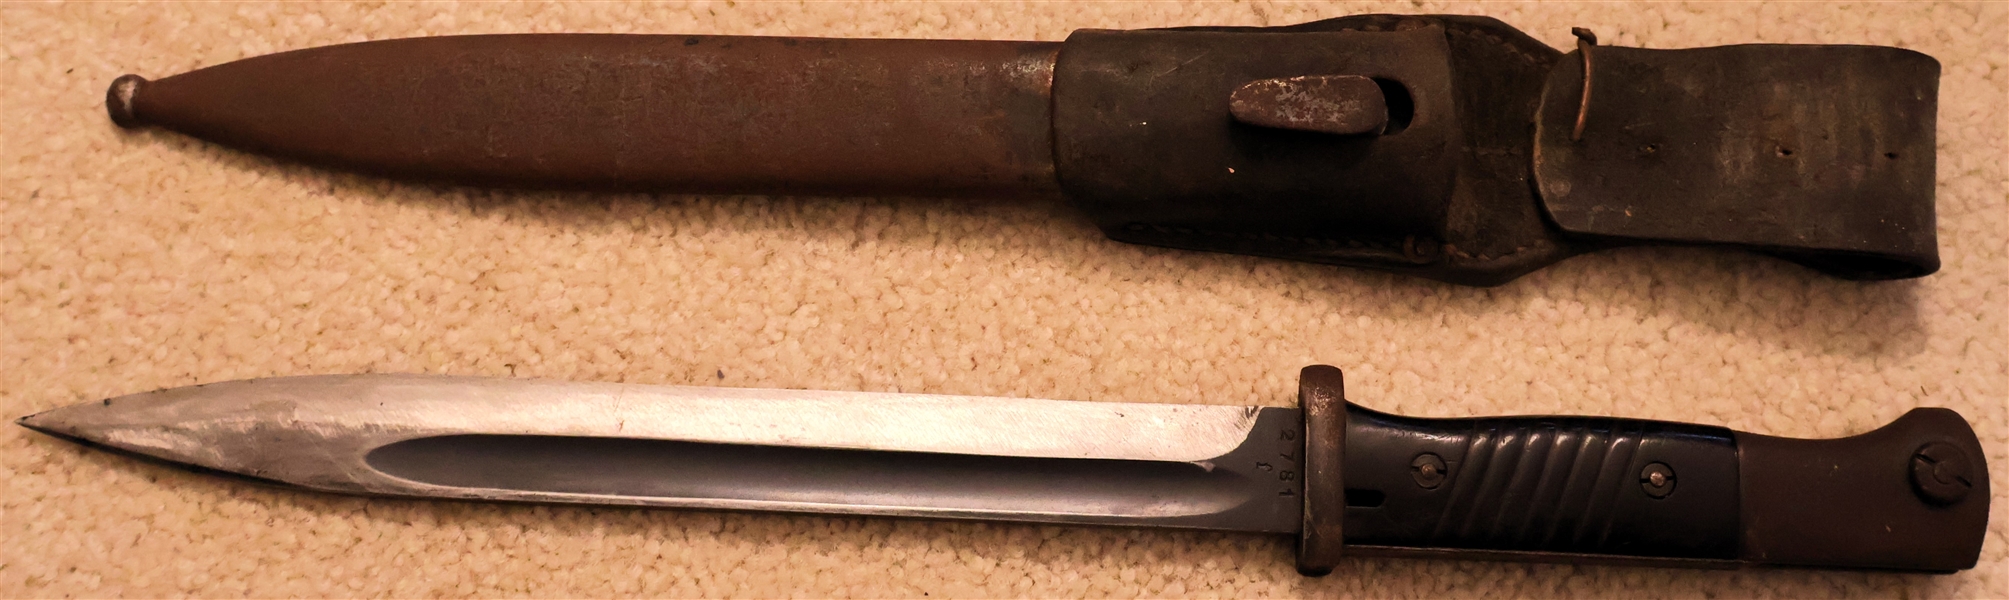 WWII Mauser K - 98 Bayonet With Original Leather Frog - with Original Sheath - Bayonet Marked Coppel G.m.b.H  